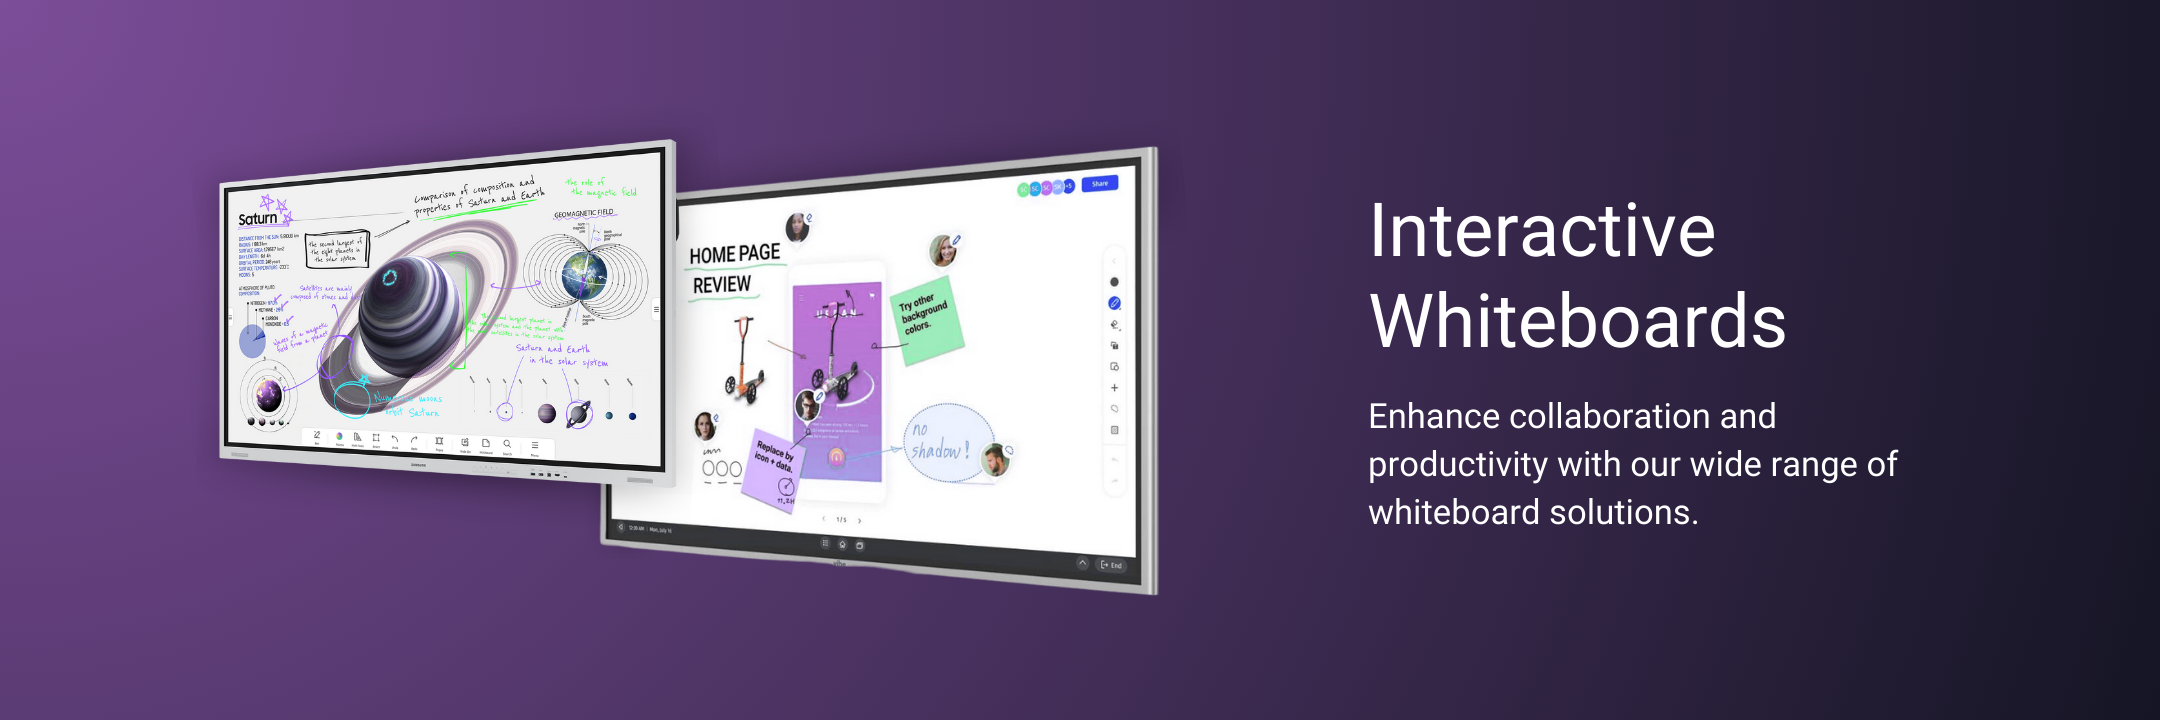 Interactive-Whiteboards